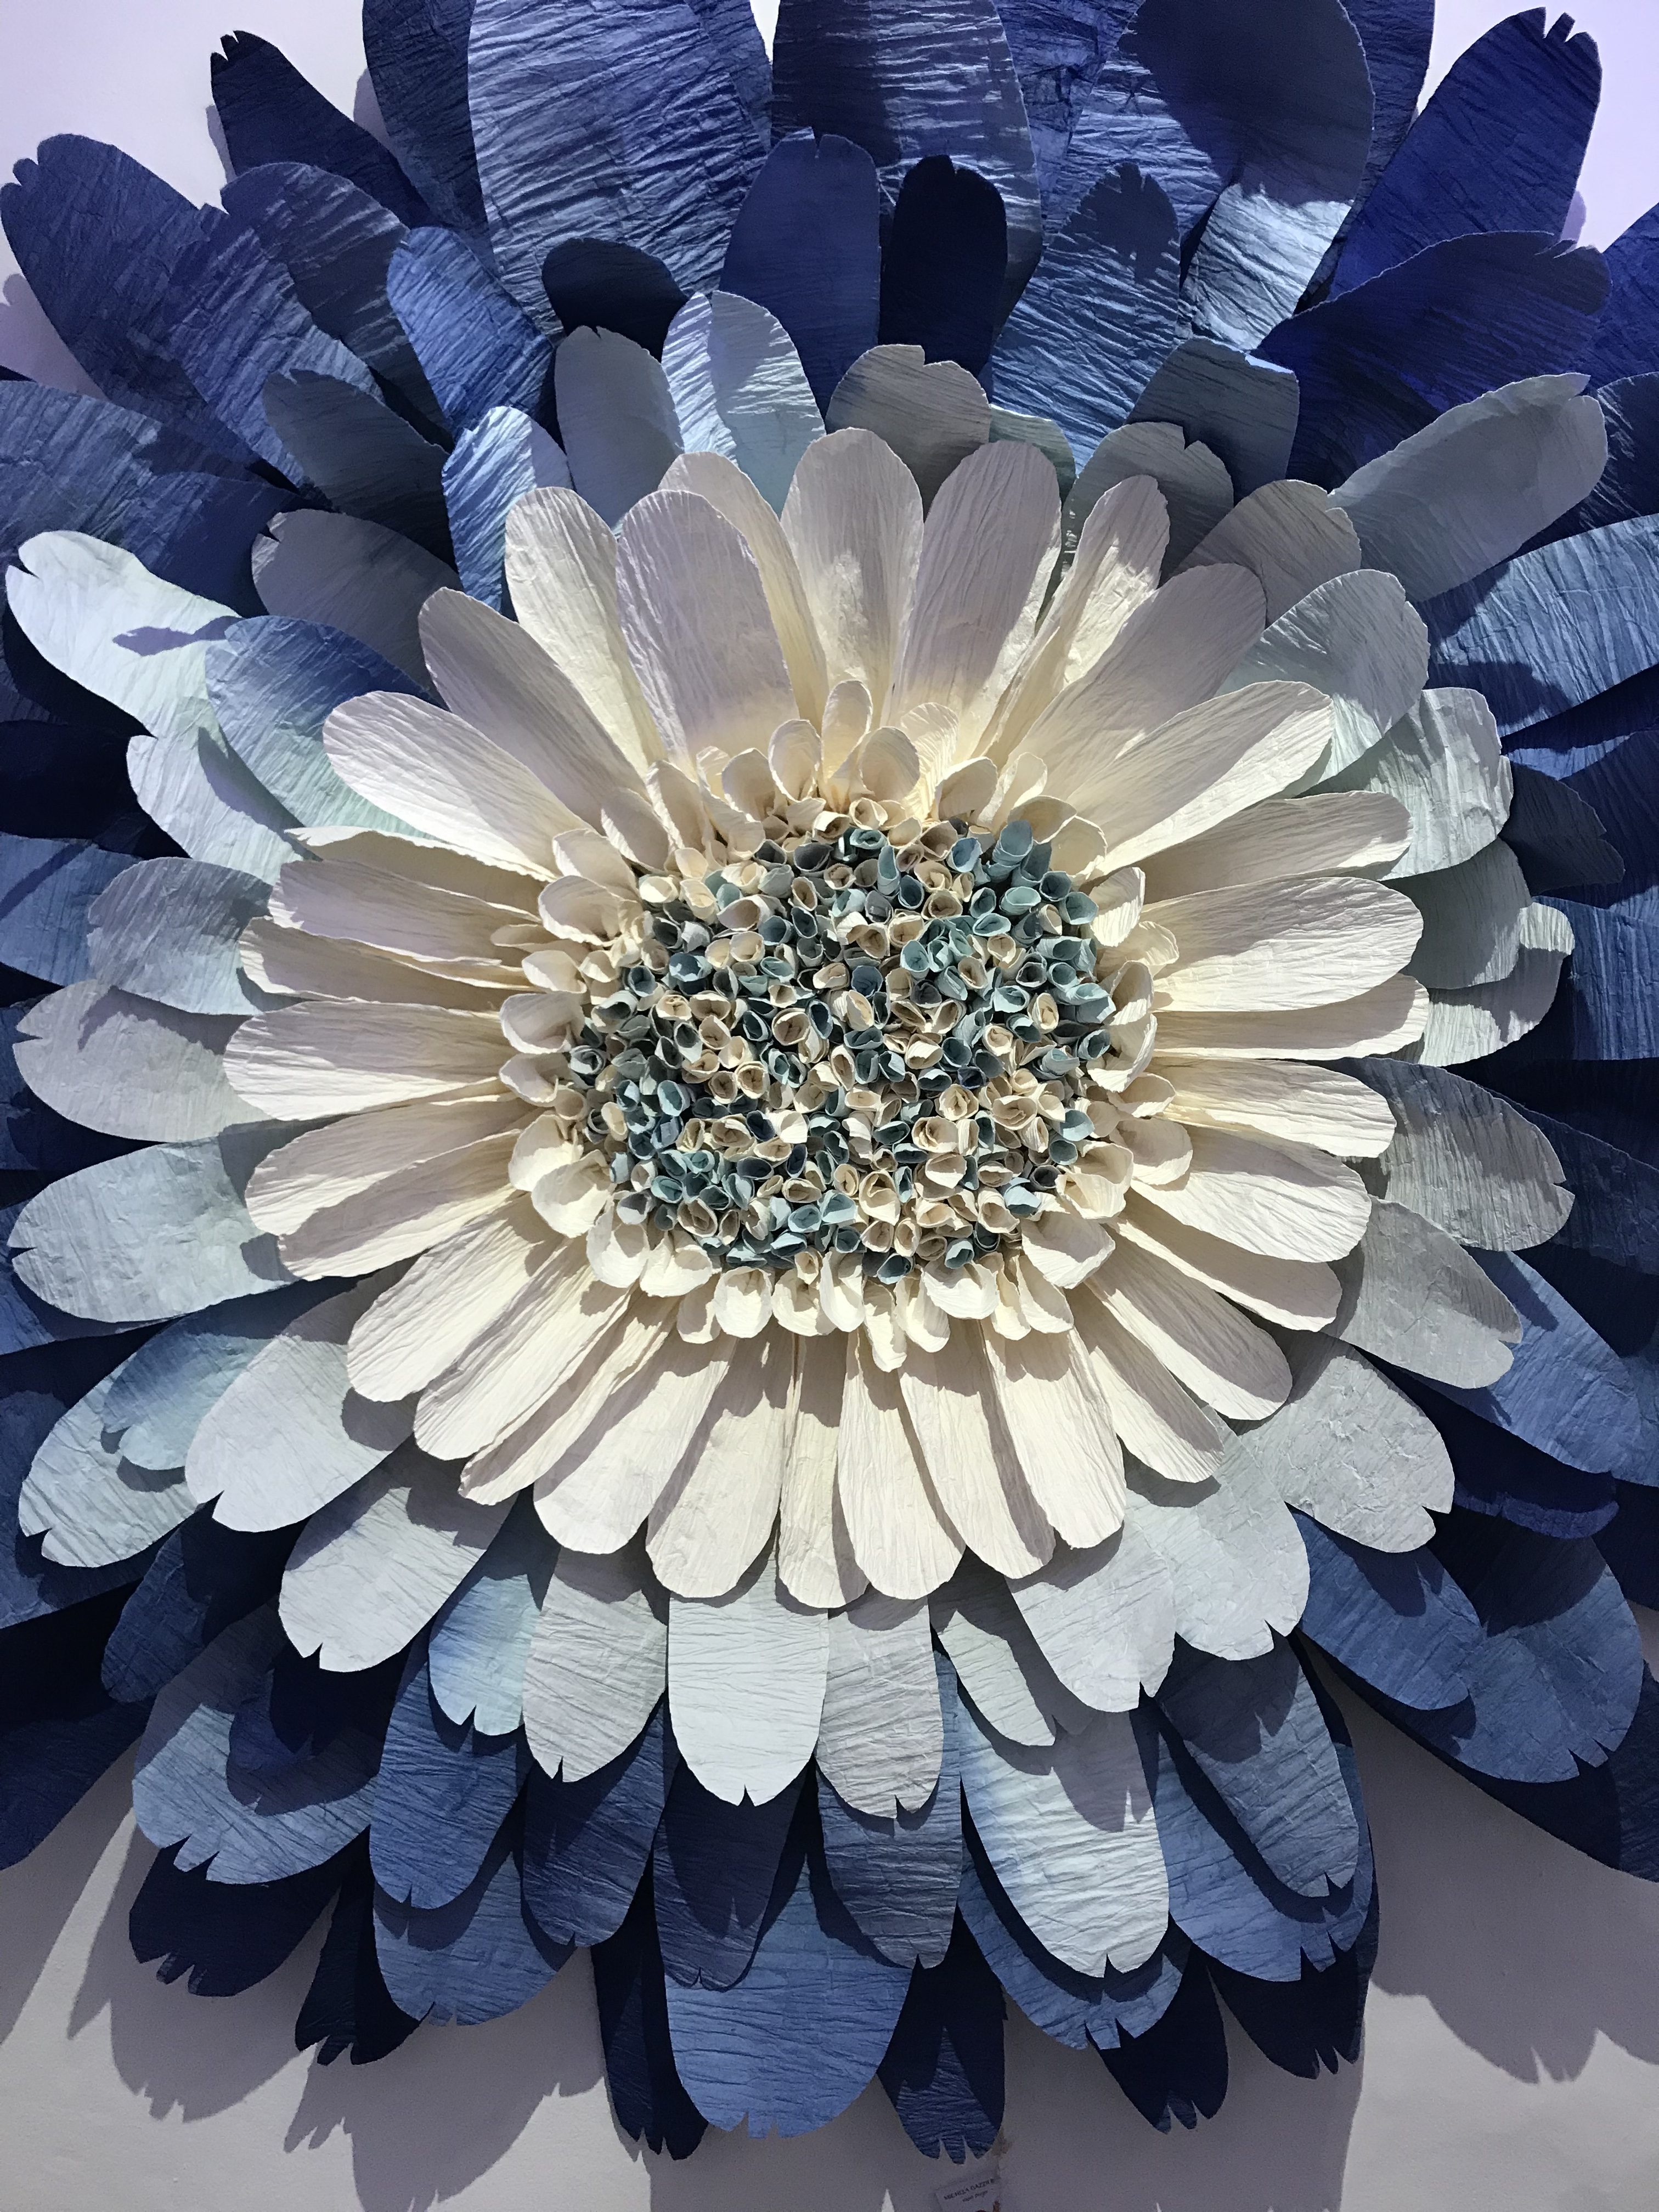 Giant paper flower hand Made in Italy